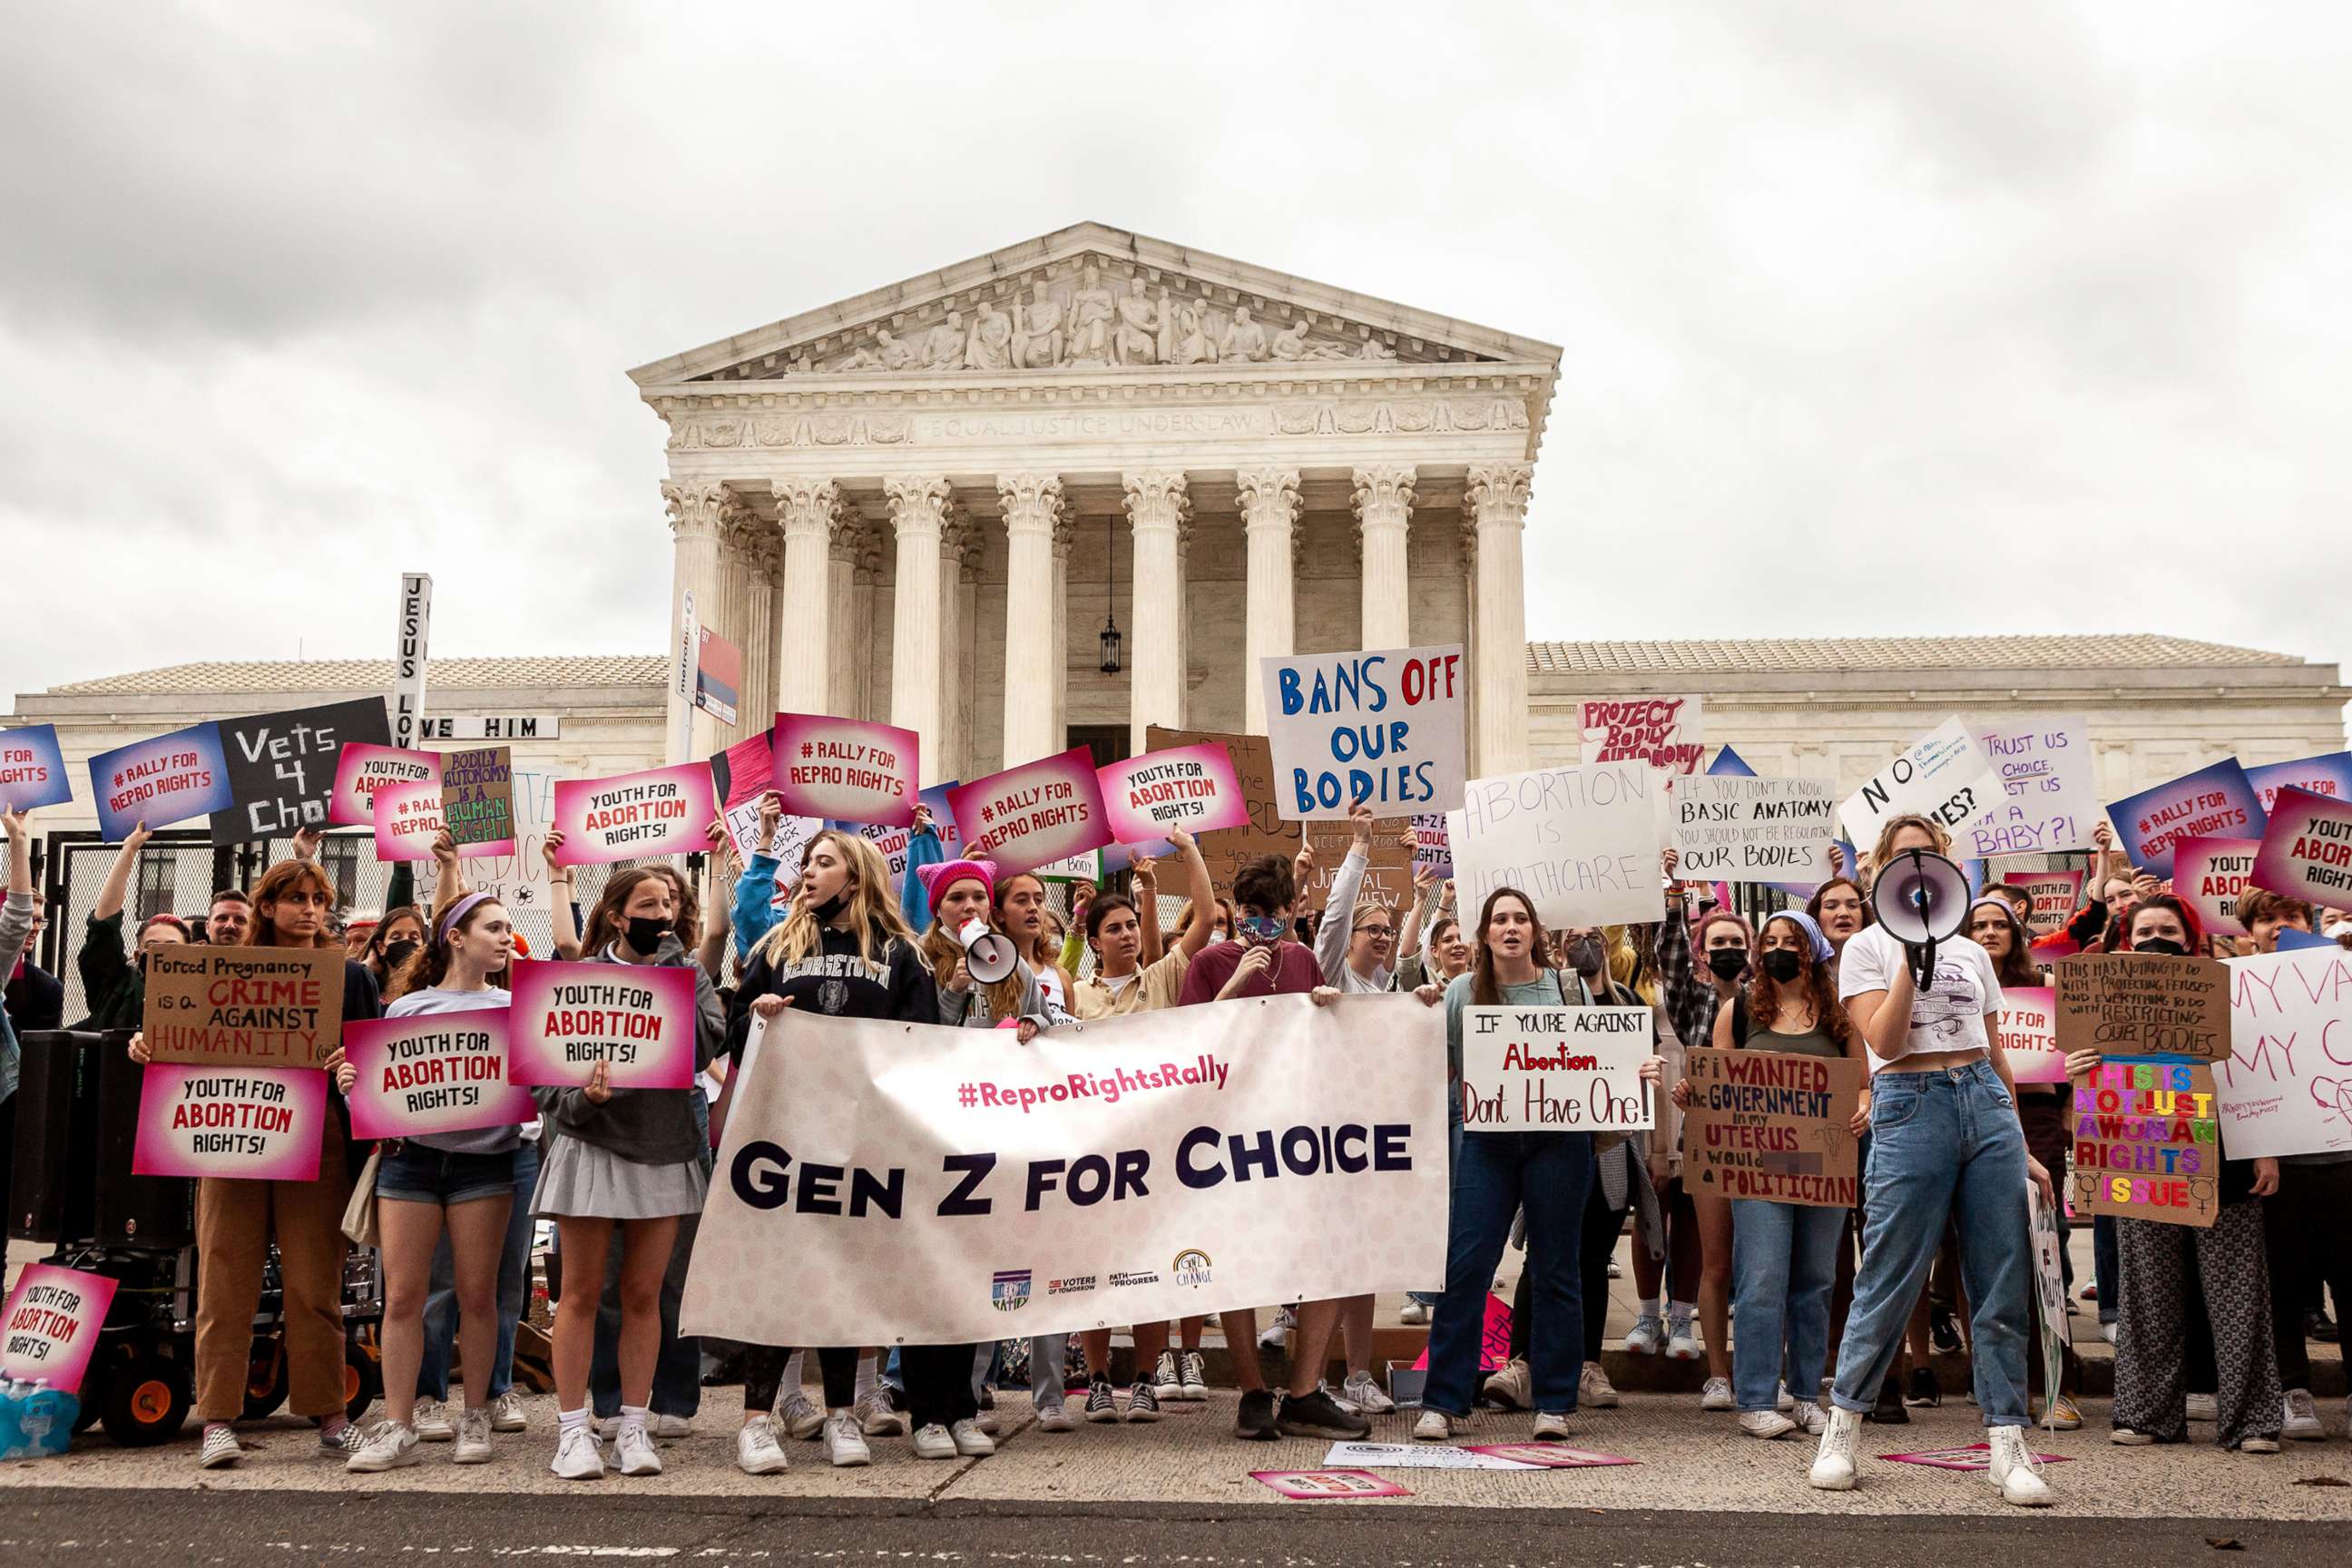 PHOTO: Abortion rights activists rally at the Supreme Court for abortion access, on May 5, 2022, in Washington, D.C.